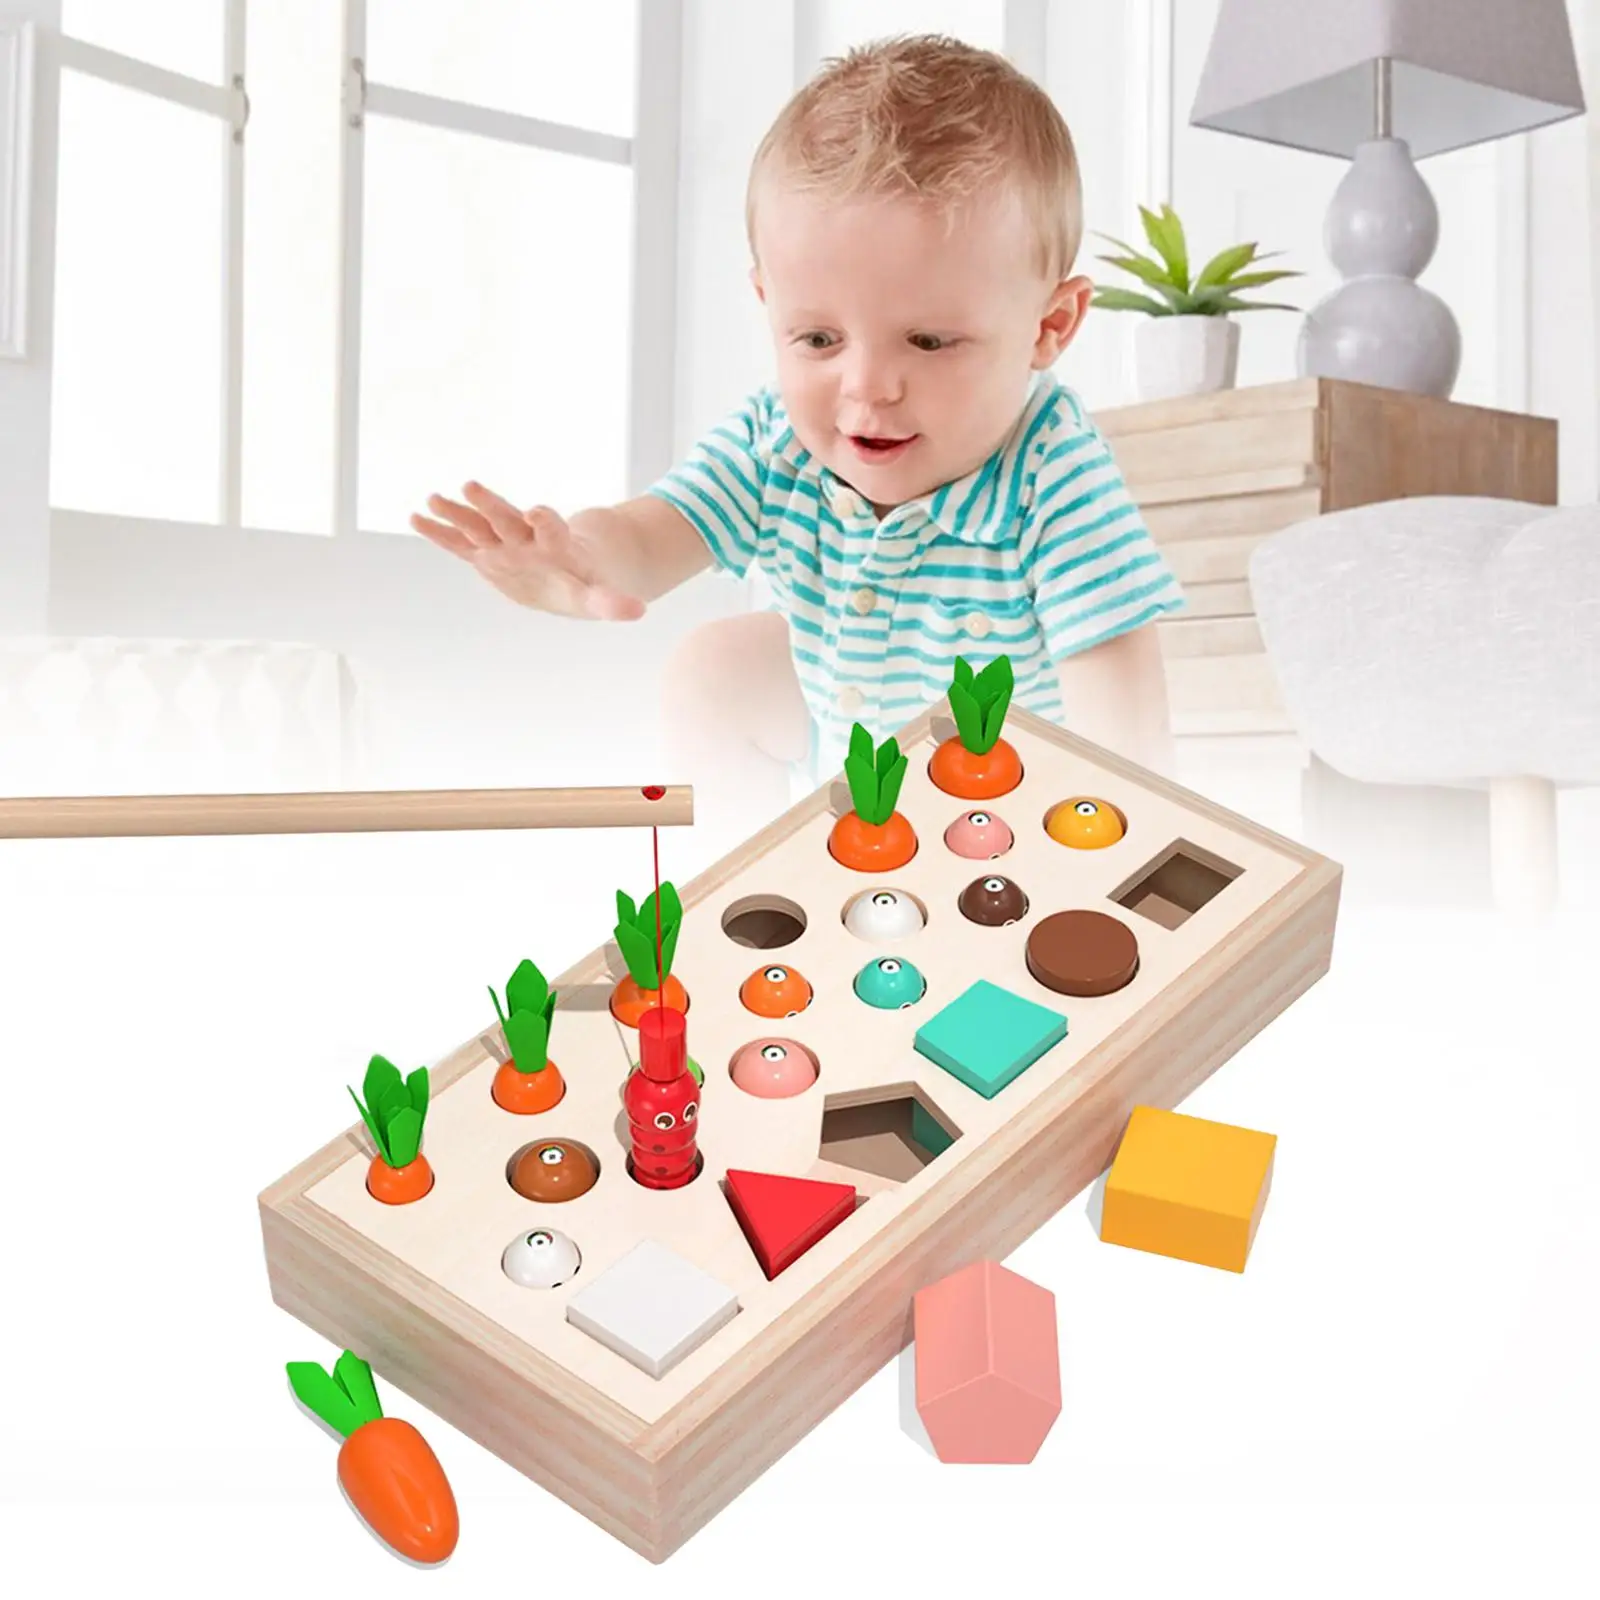 Toddlers Montessori Wooden Toys, Counting Parent Child Interactive Early Educational Toys Catching Insects for Xmas Gifts